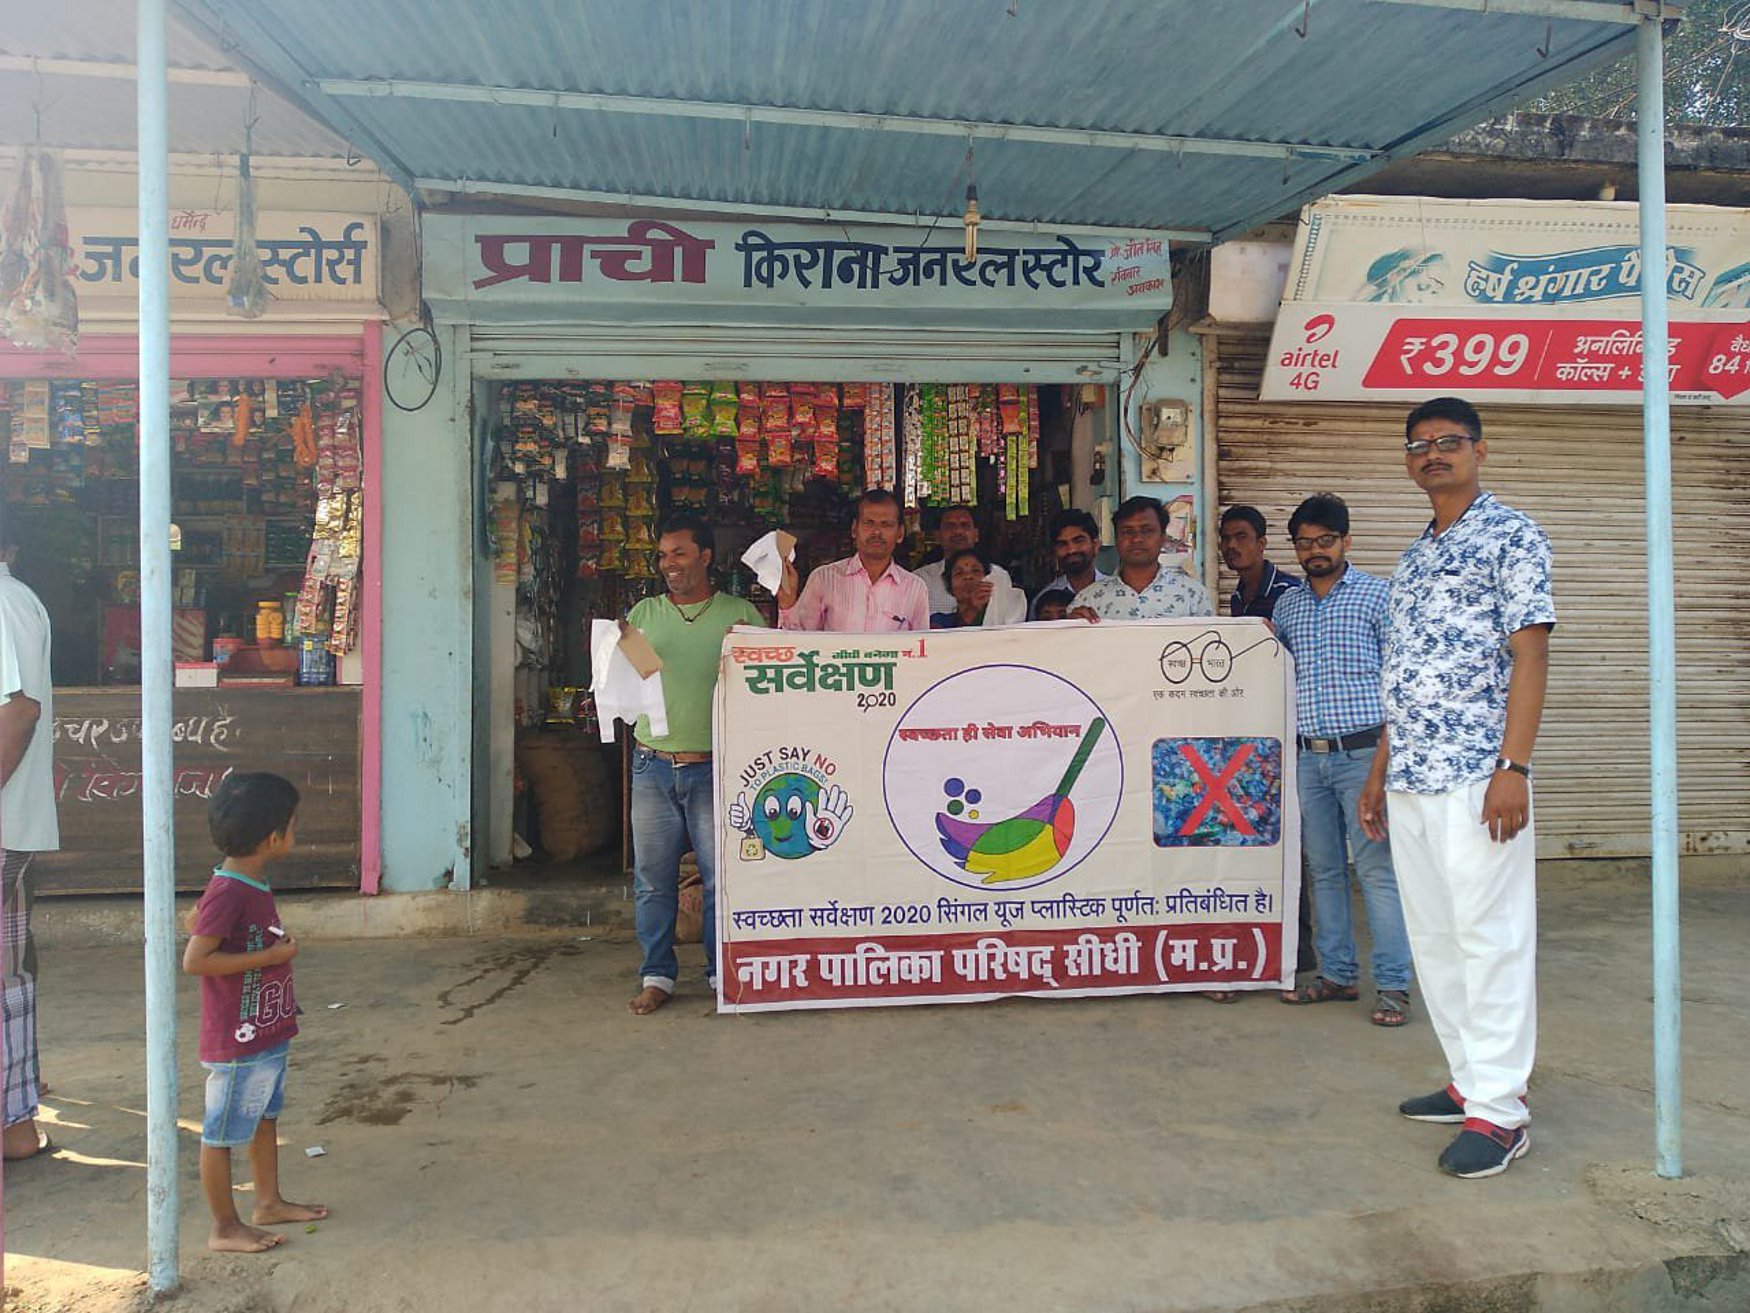 Awareness programs started to make Sidhi number-1 in cleanliness